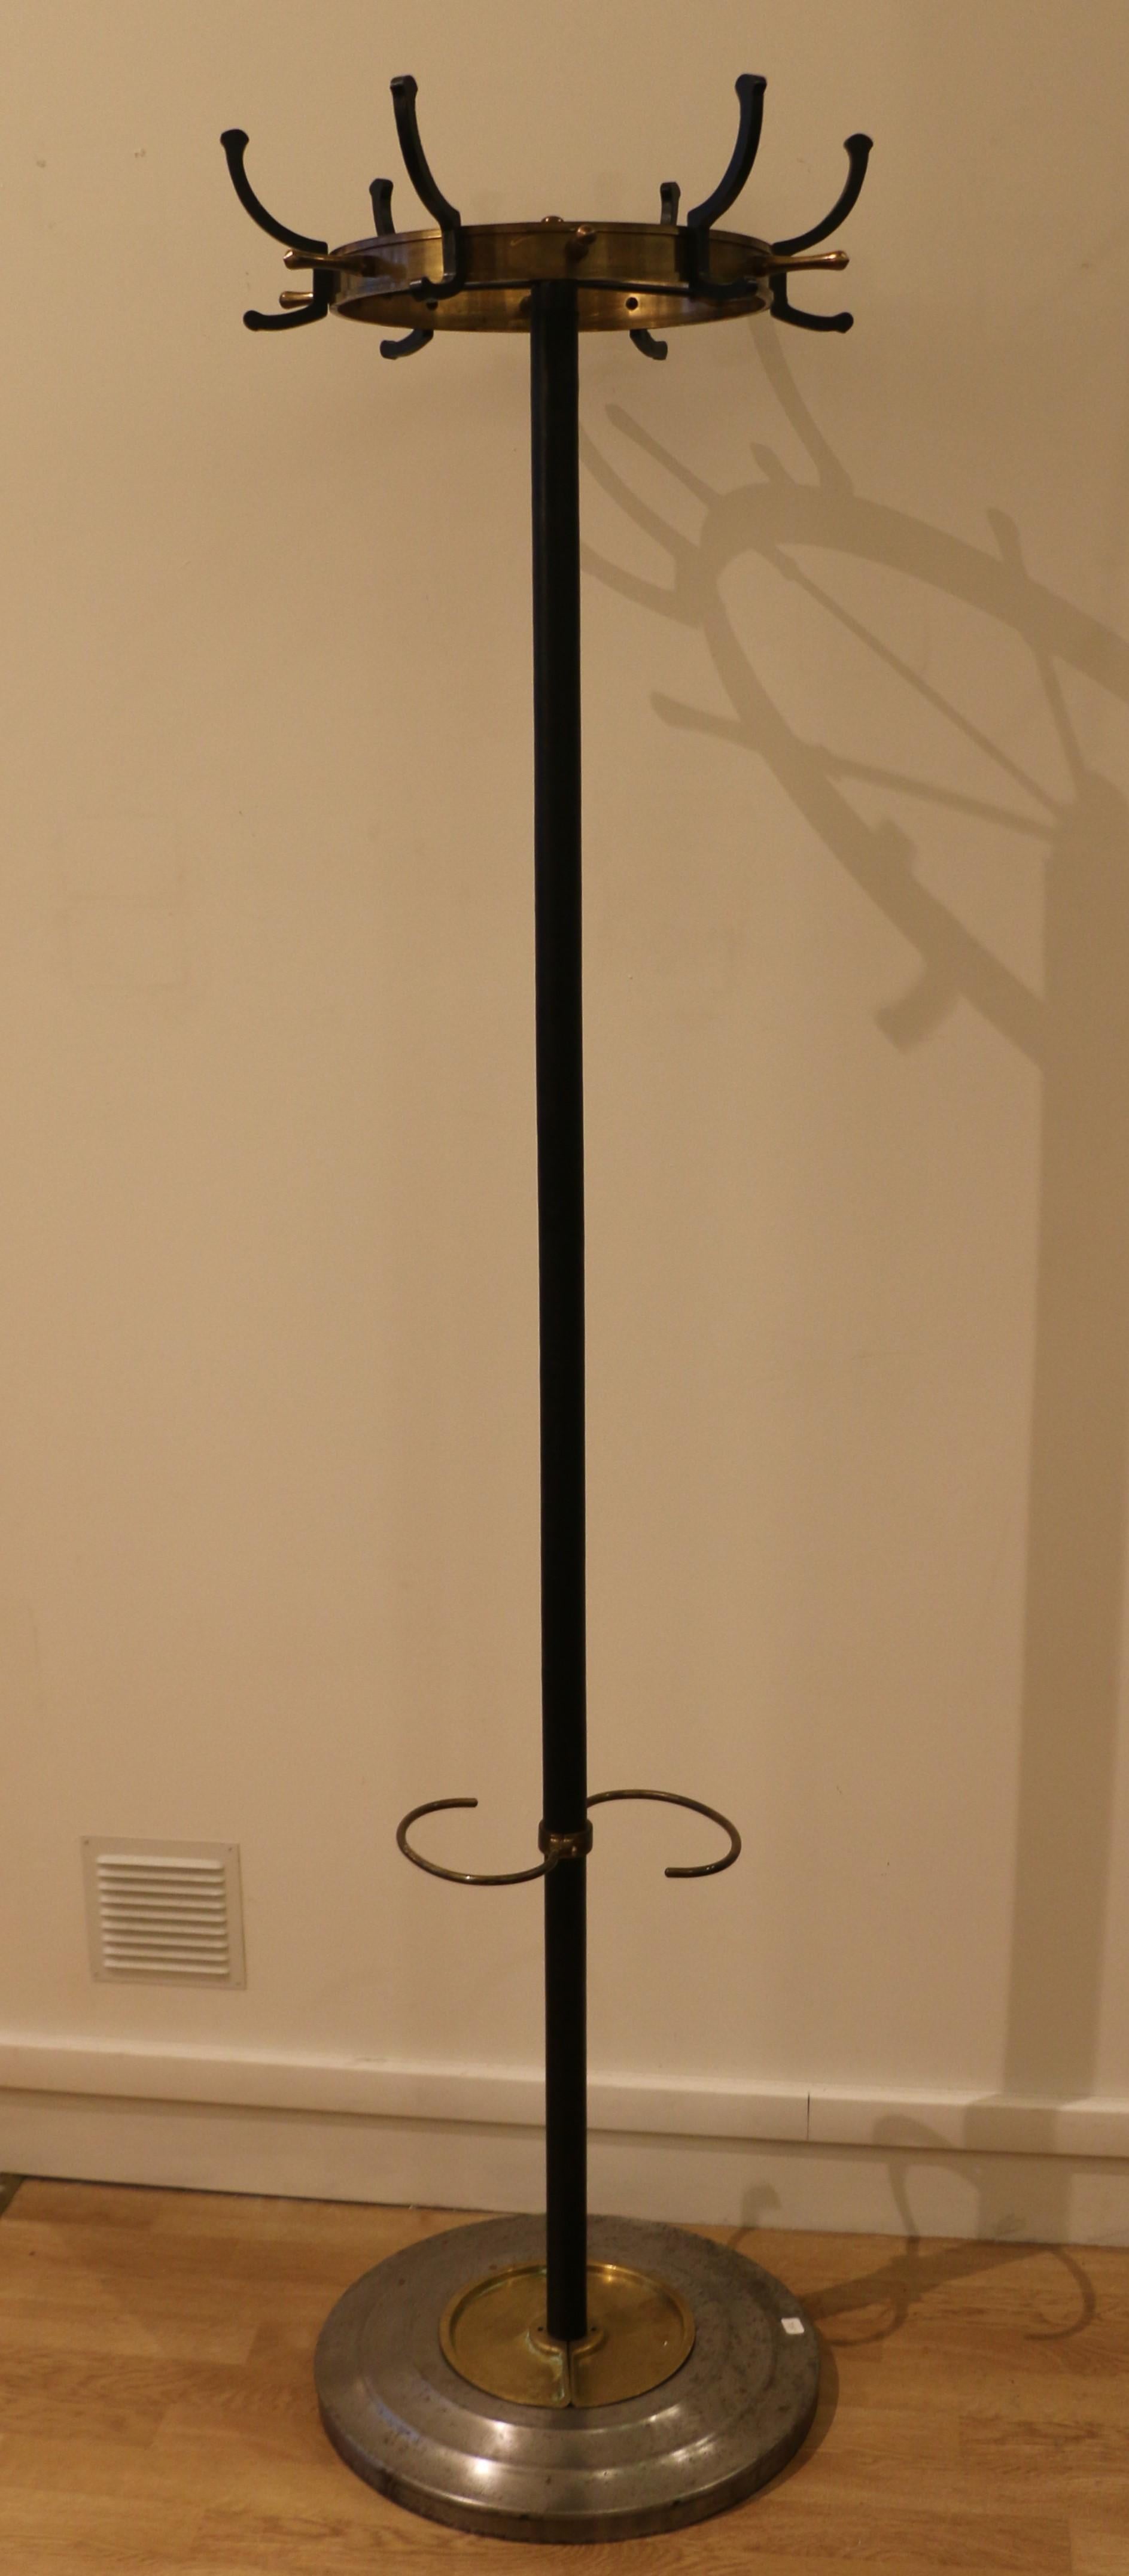 This furniture is typical of Jacques Adnet's work in the early 1950s.
This coat stand allows to suspend up to 18 garments. It is also an umbrella stand.
The base is made of steel, with two removable brass plaques. The shaft is covered with leather